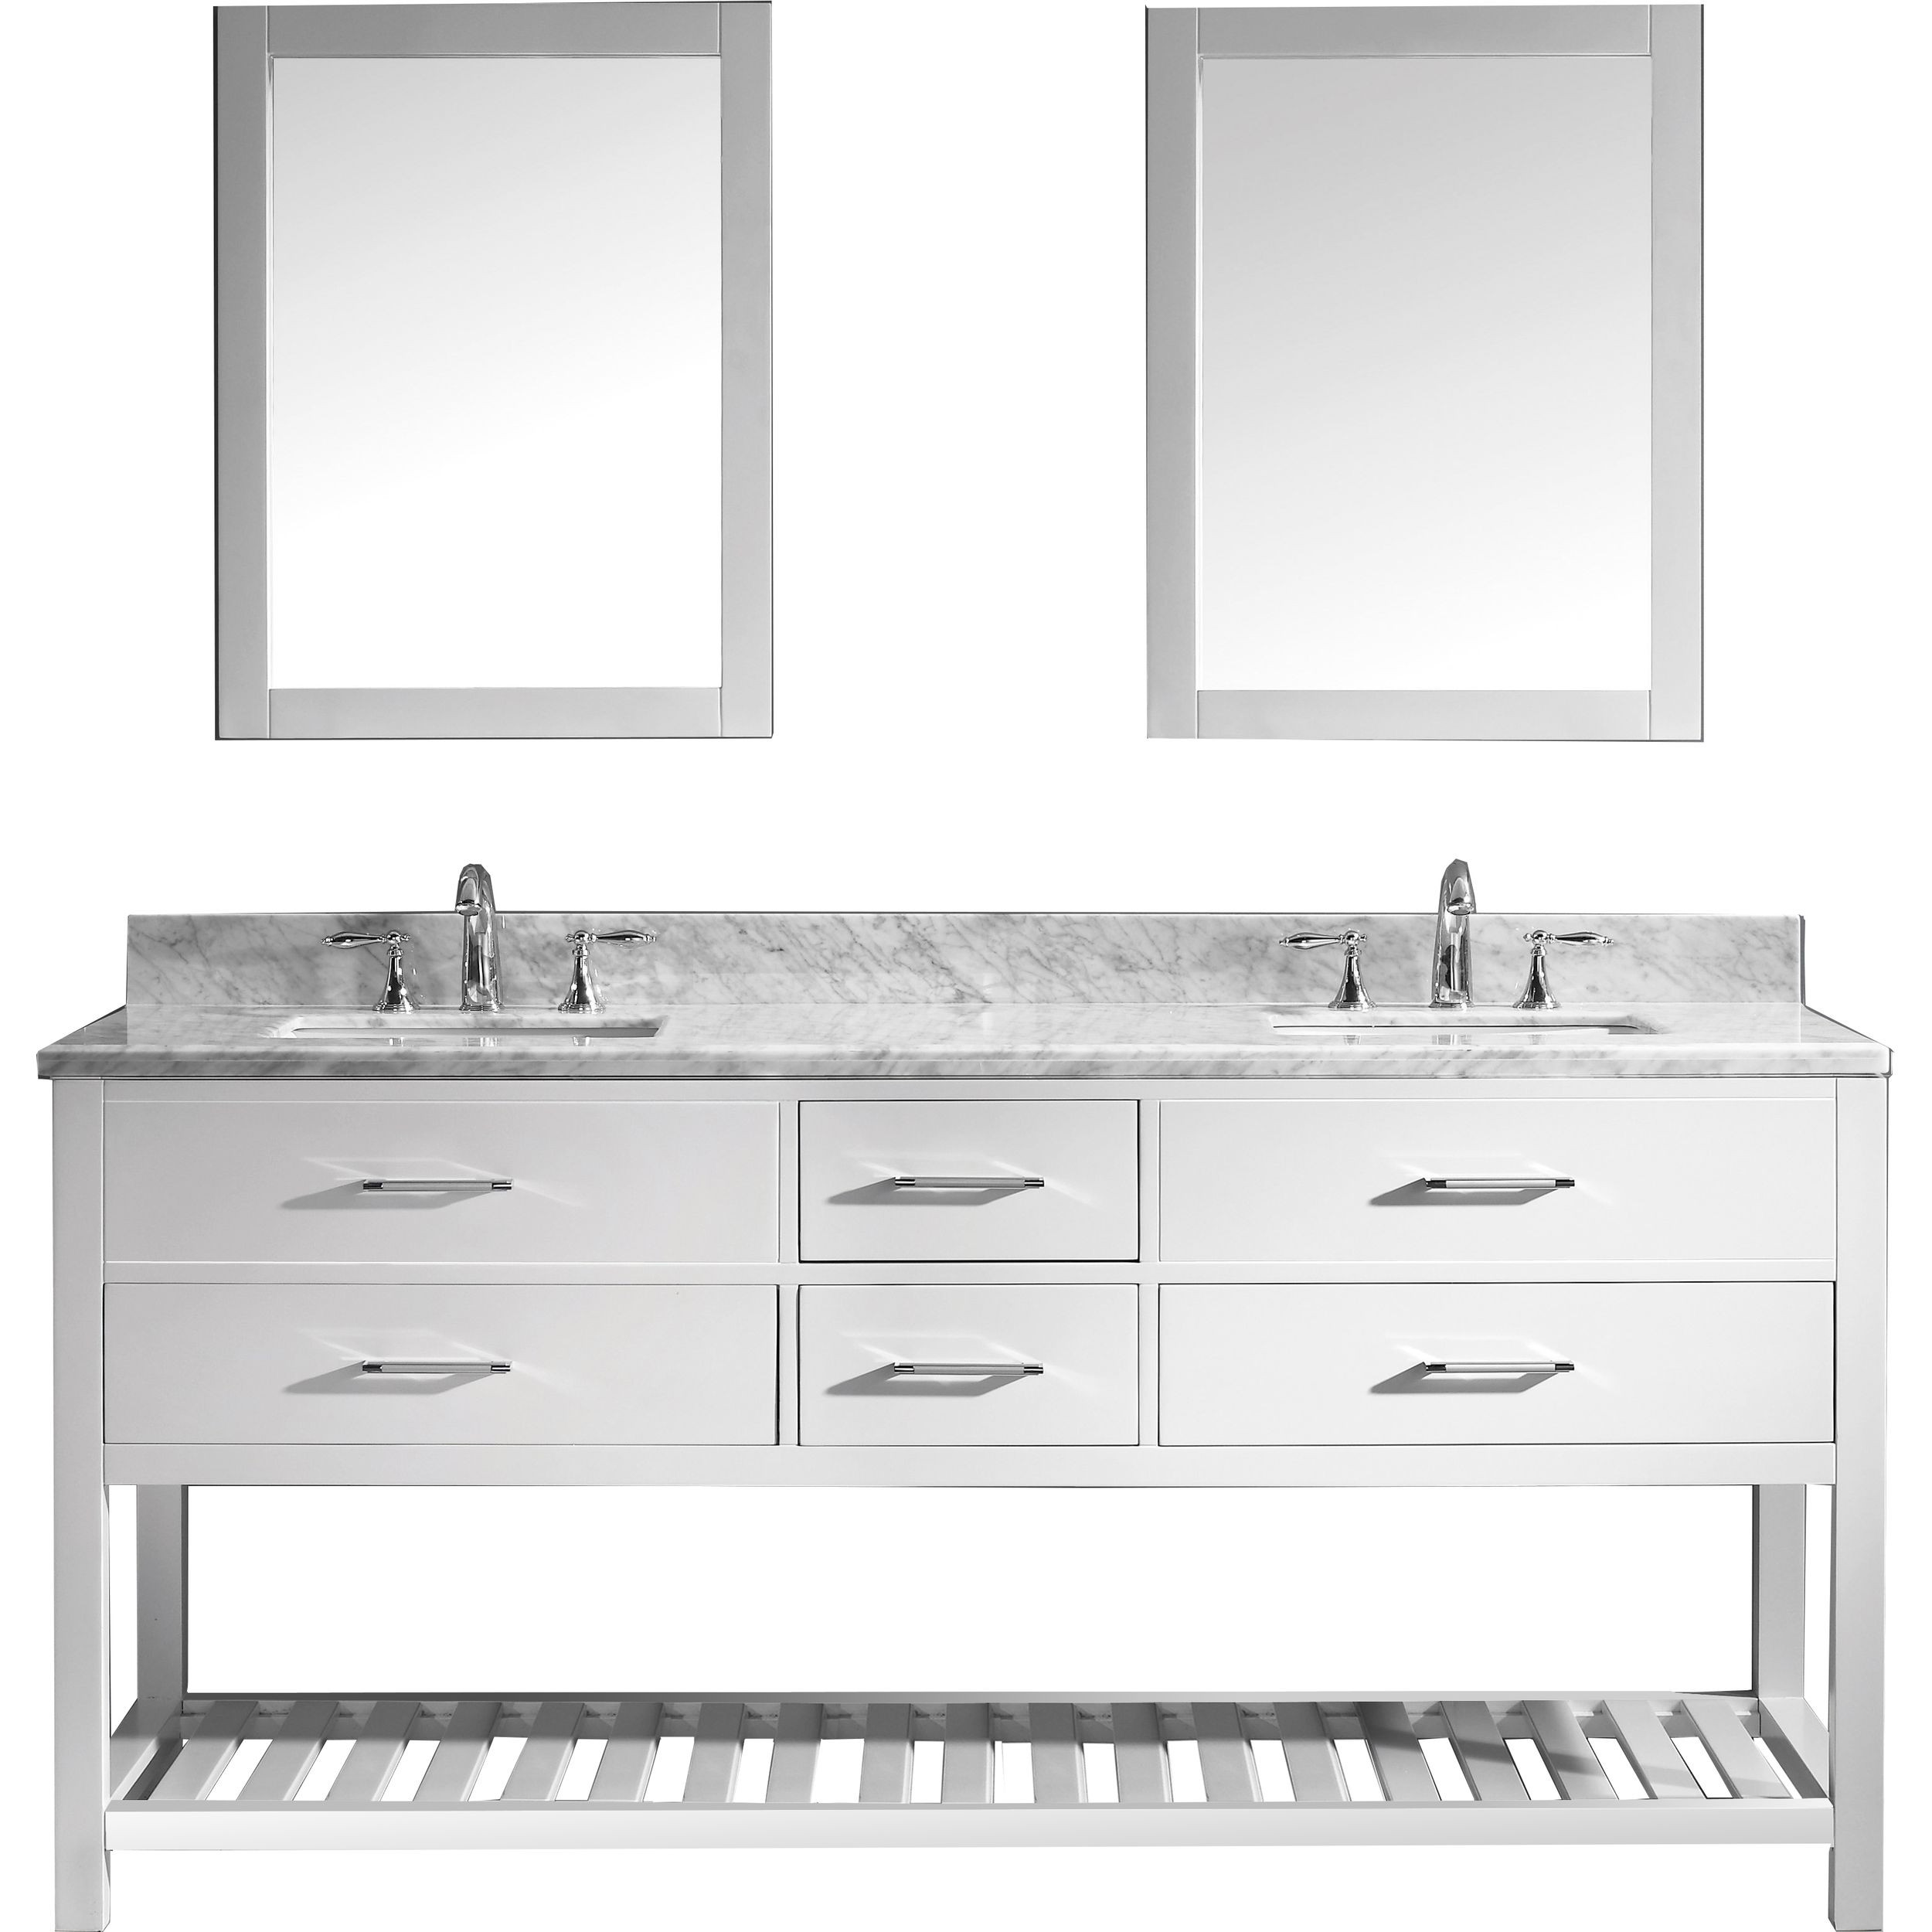 Bathroom Mirror Size
 How to Choose a Mirror Size for your Bathroom Vanity